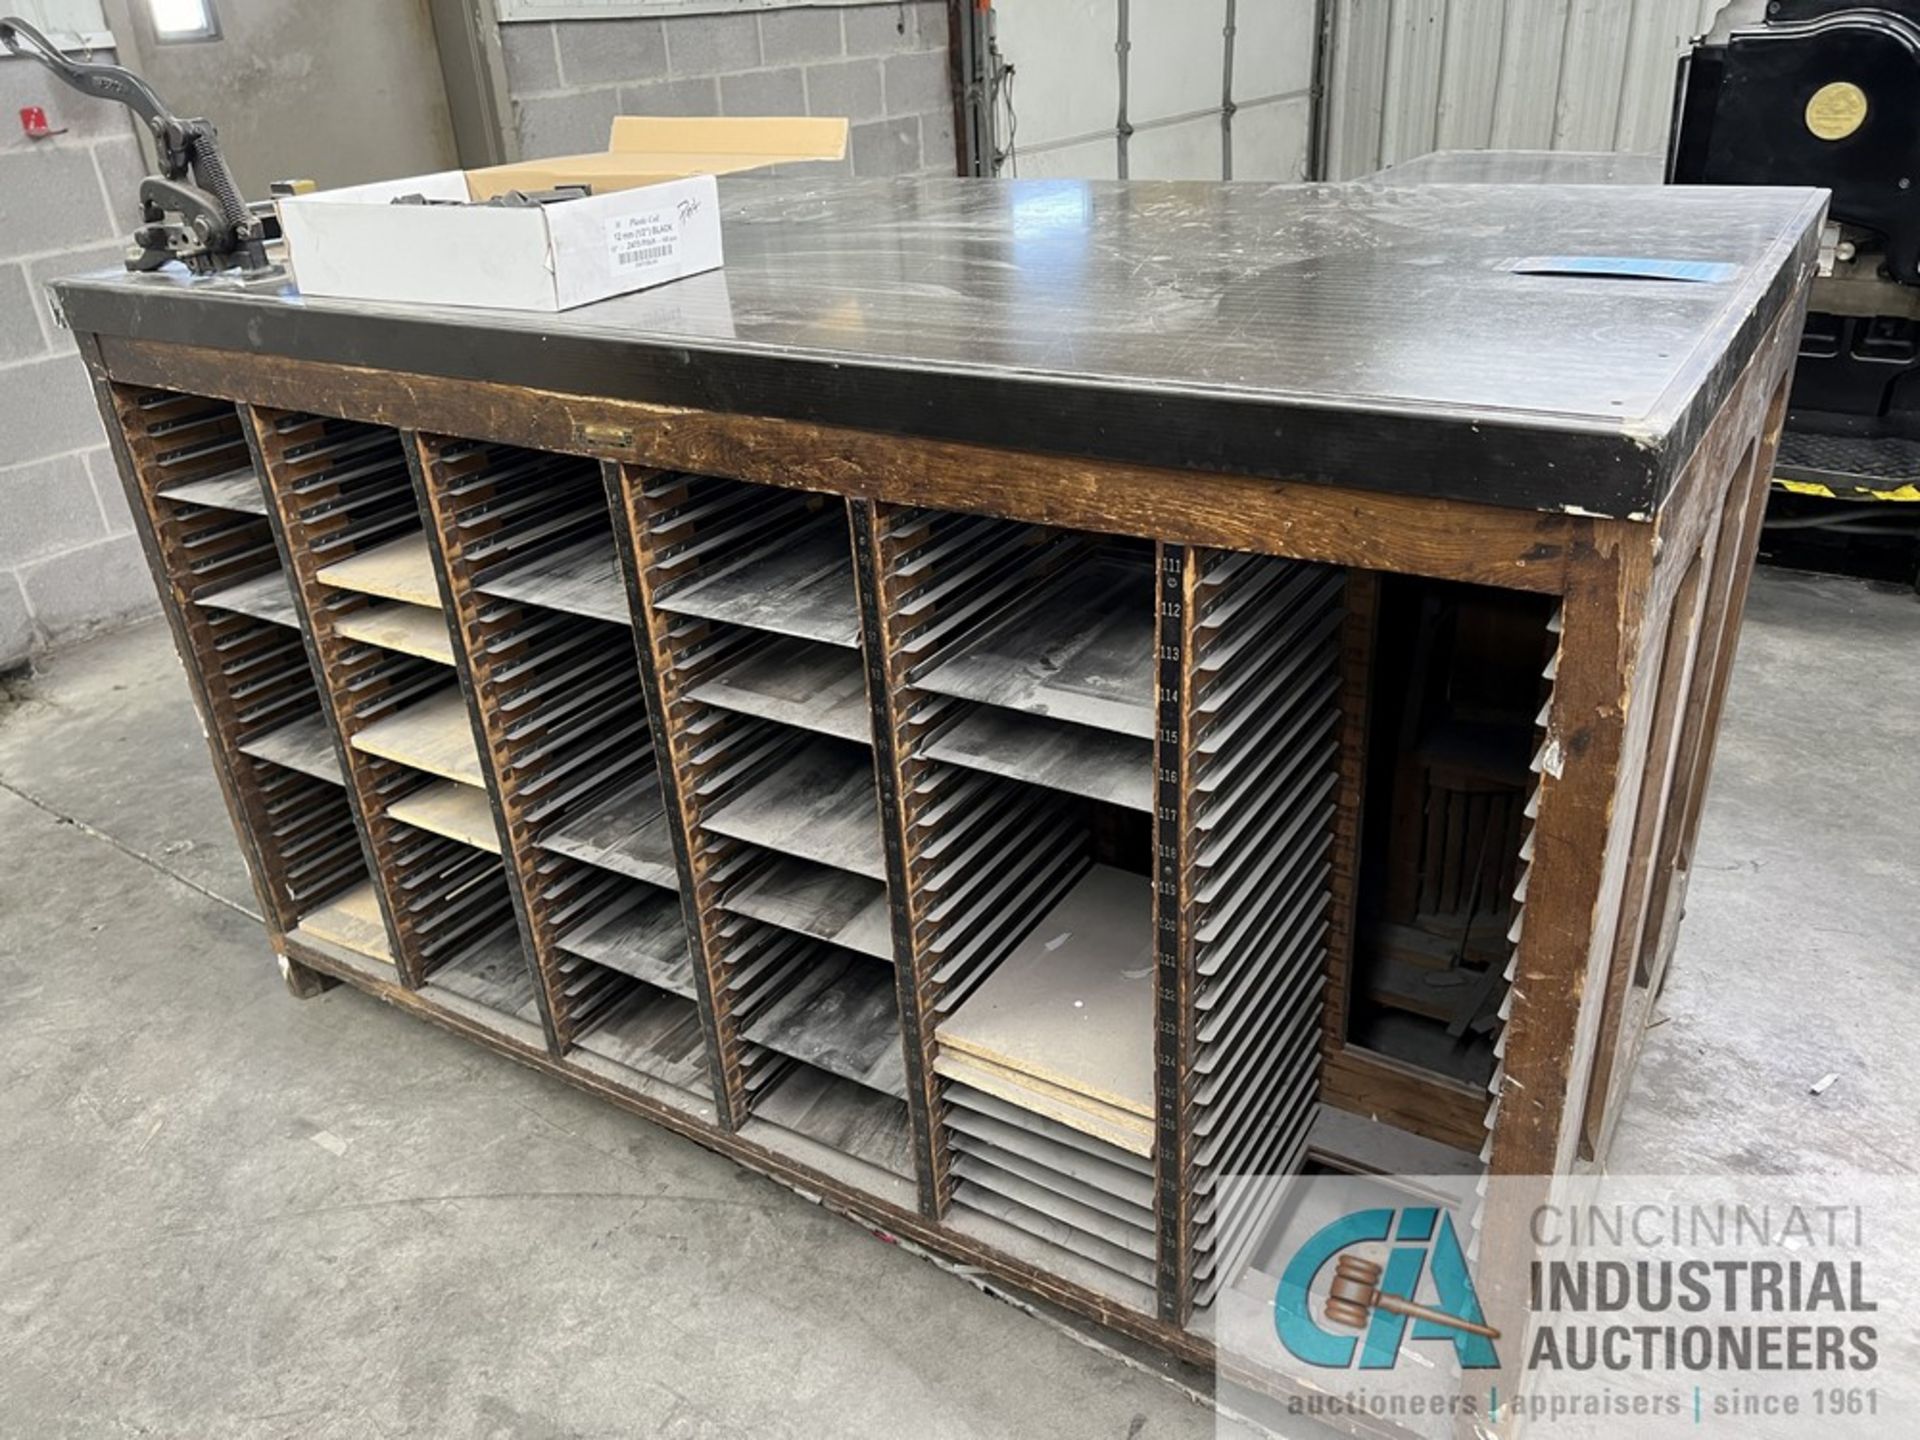 65" X 39" THE CHALLENGE MACHINERY CO. STEEL TOP LAYOUT TABLE - Image 8 of 8